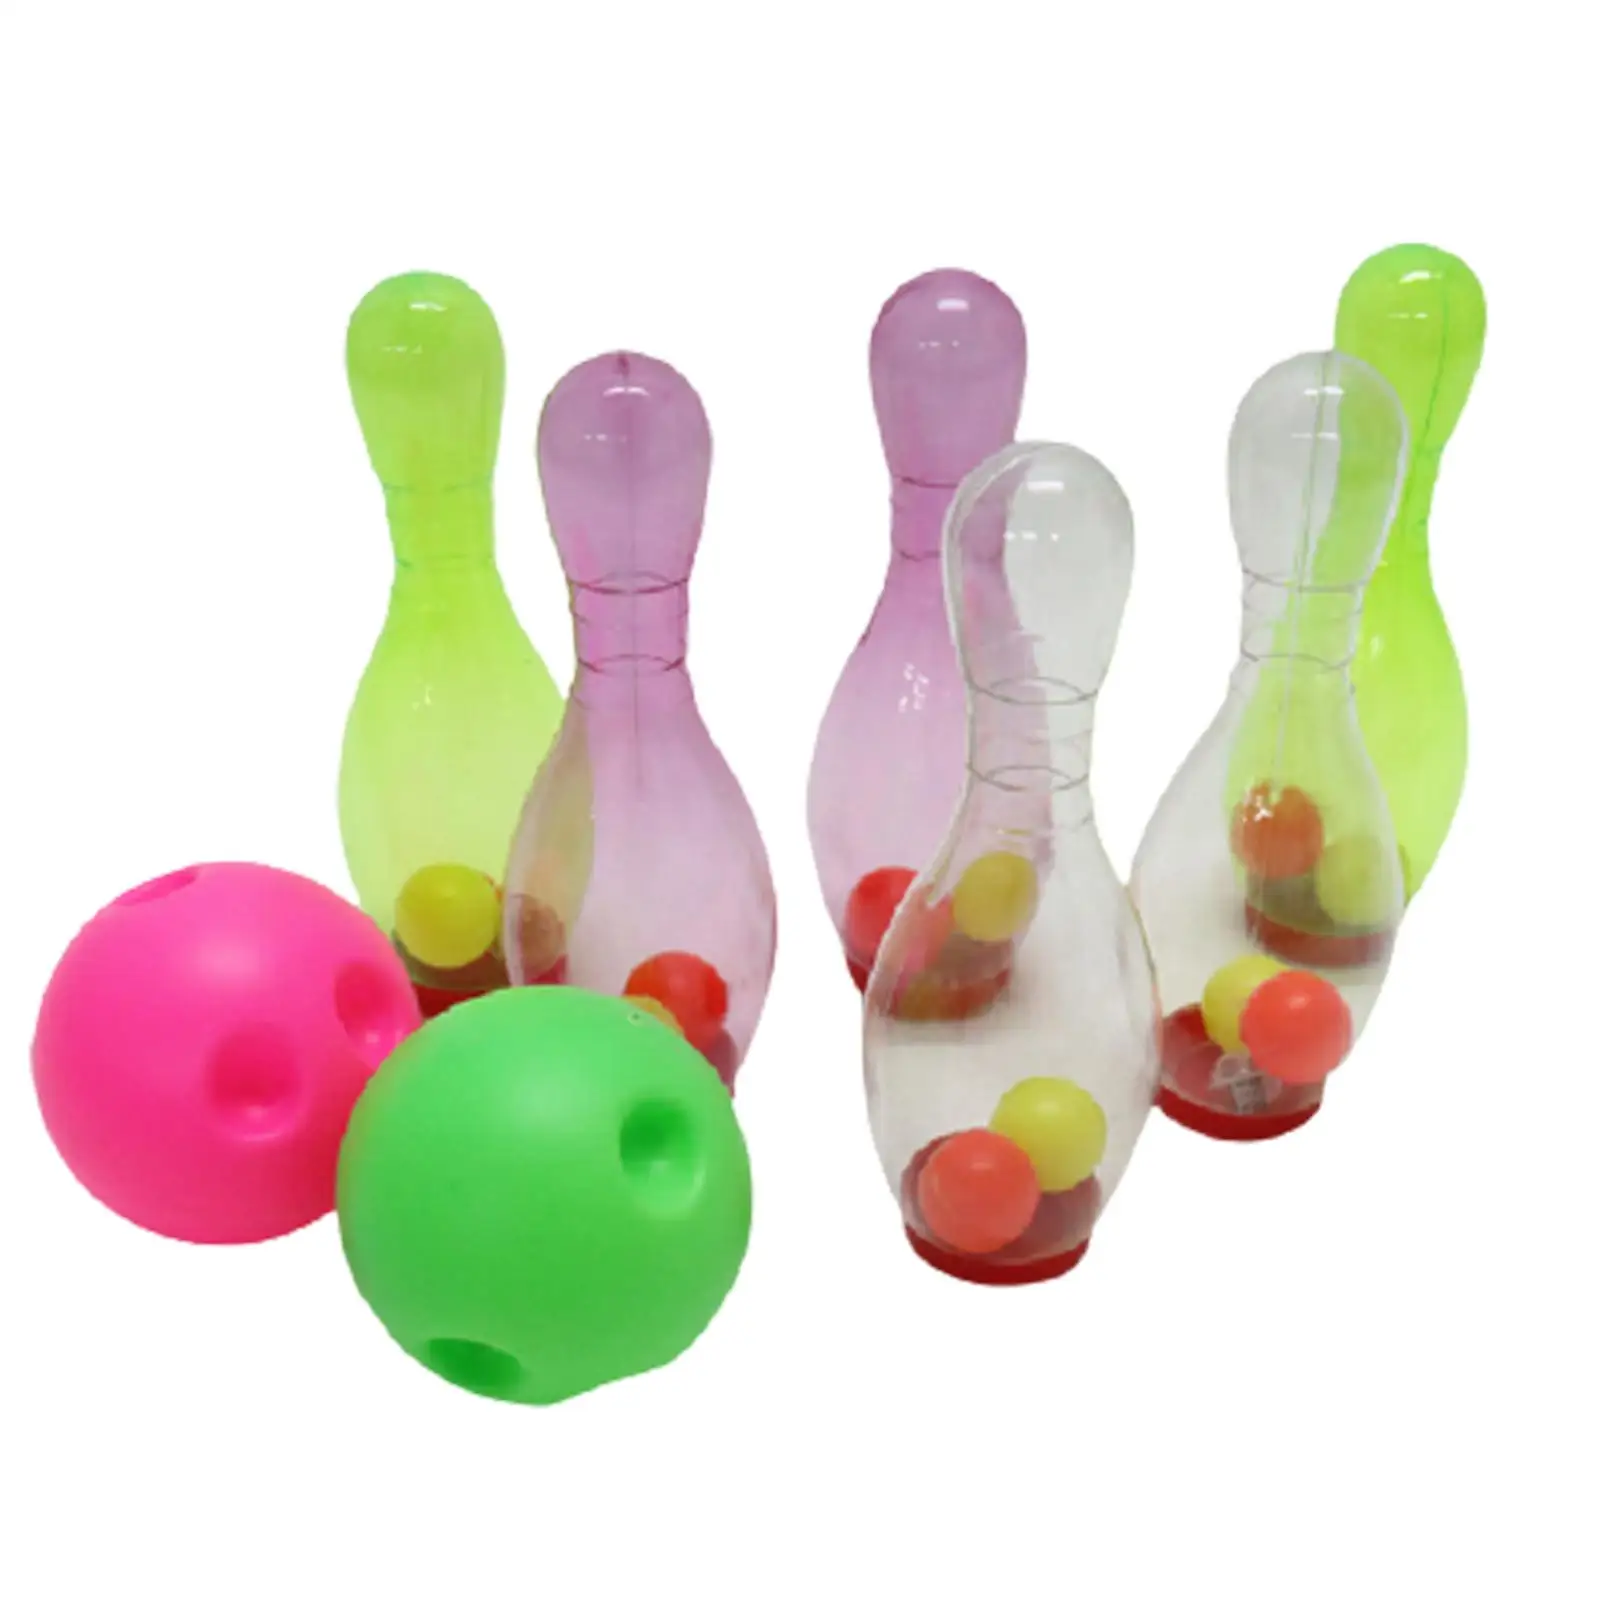 Kids Bowling Play Set Light up Motor Skills Includes 6 Bowling Pins and 2 Ball for Boys Girls Child Preschooler 2,3,4,5 Year Old